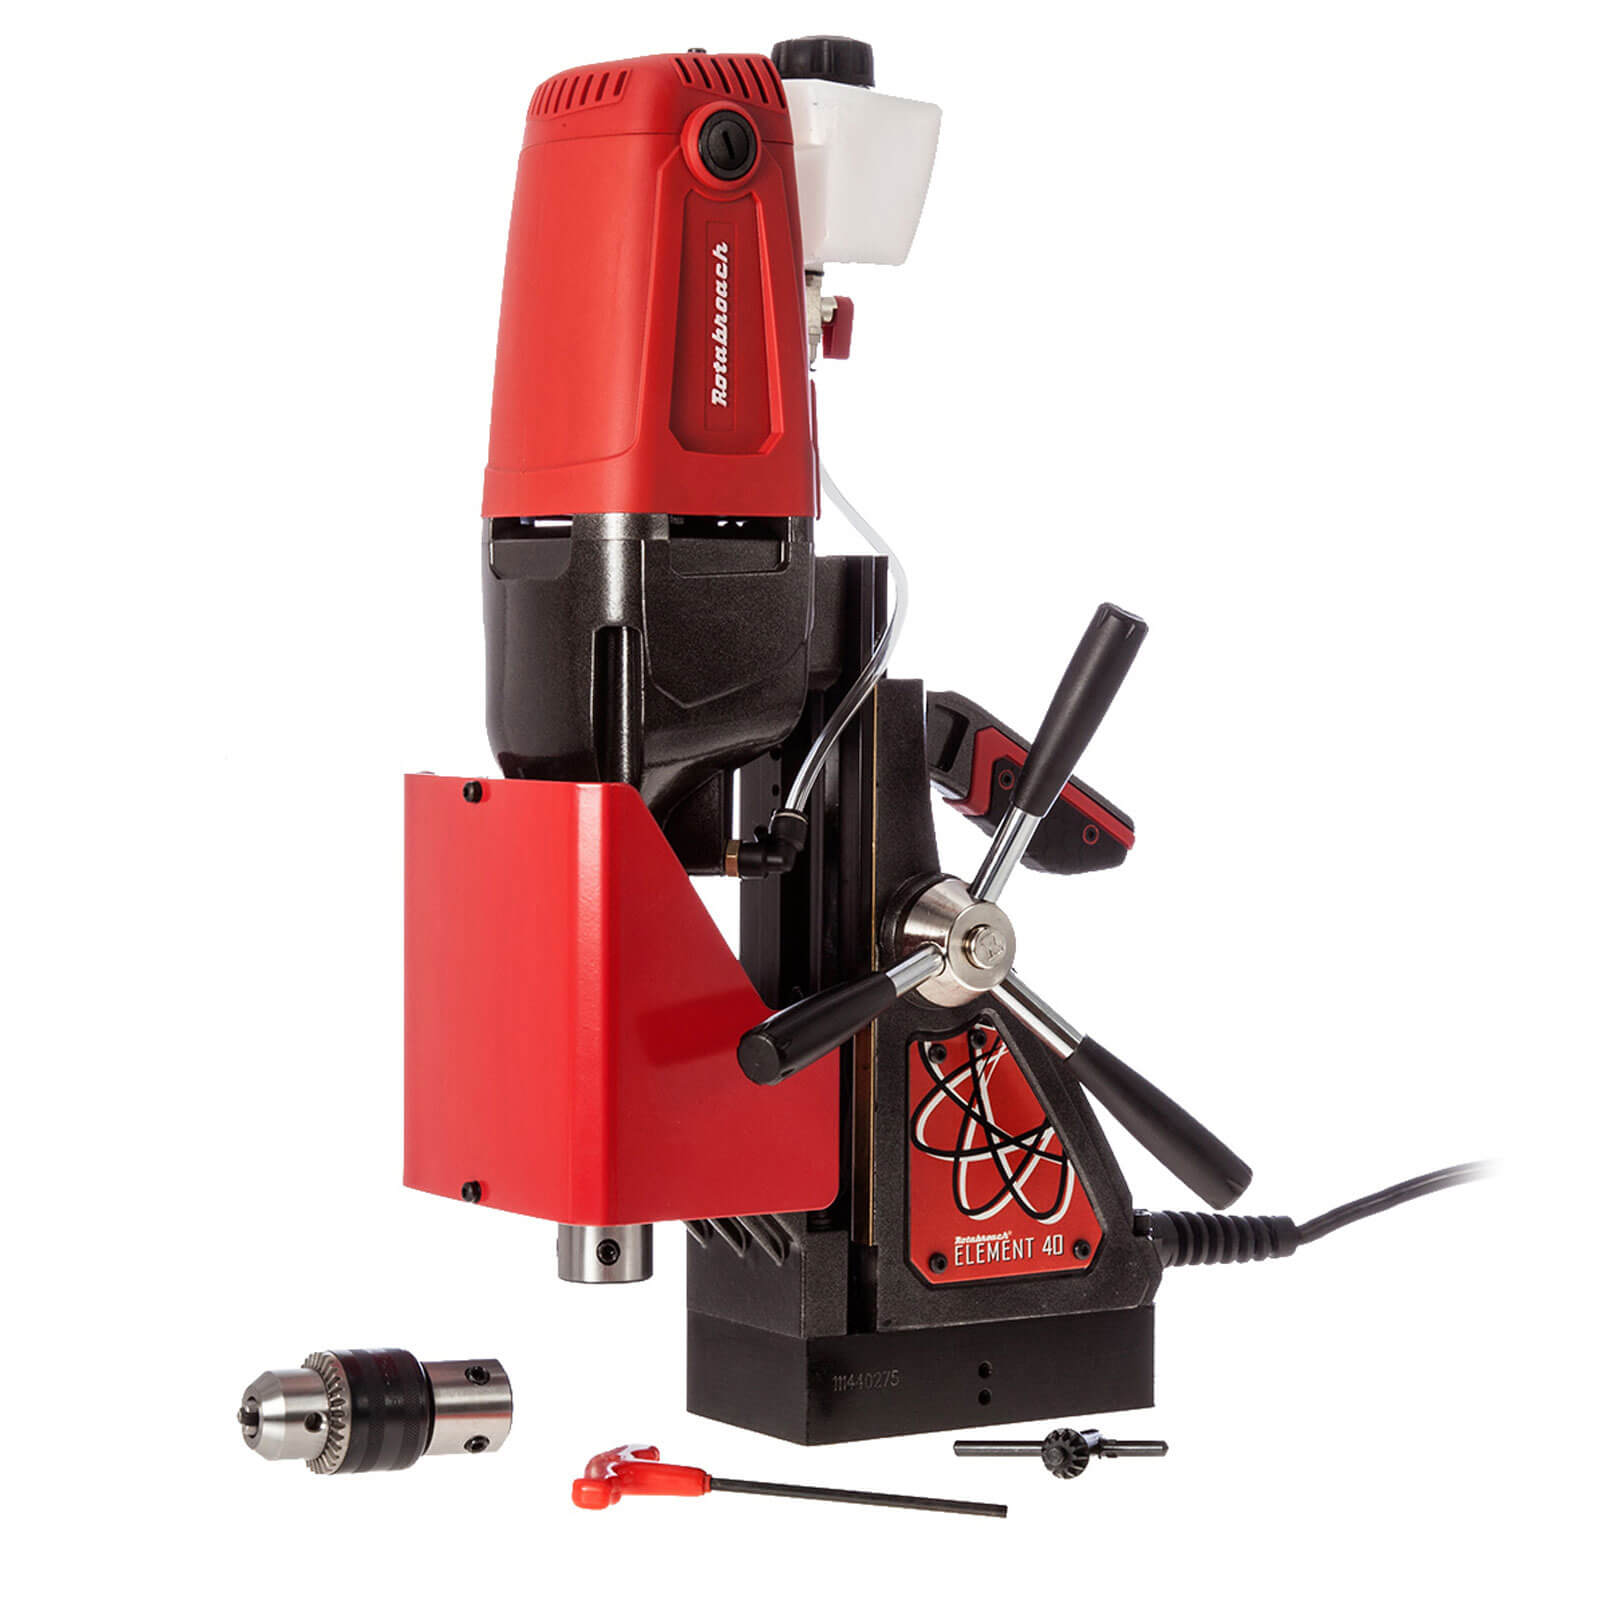 Image of Rotabroach Element 40 Magnetic Drilling Machine 110v